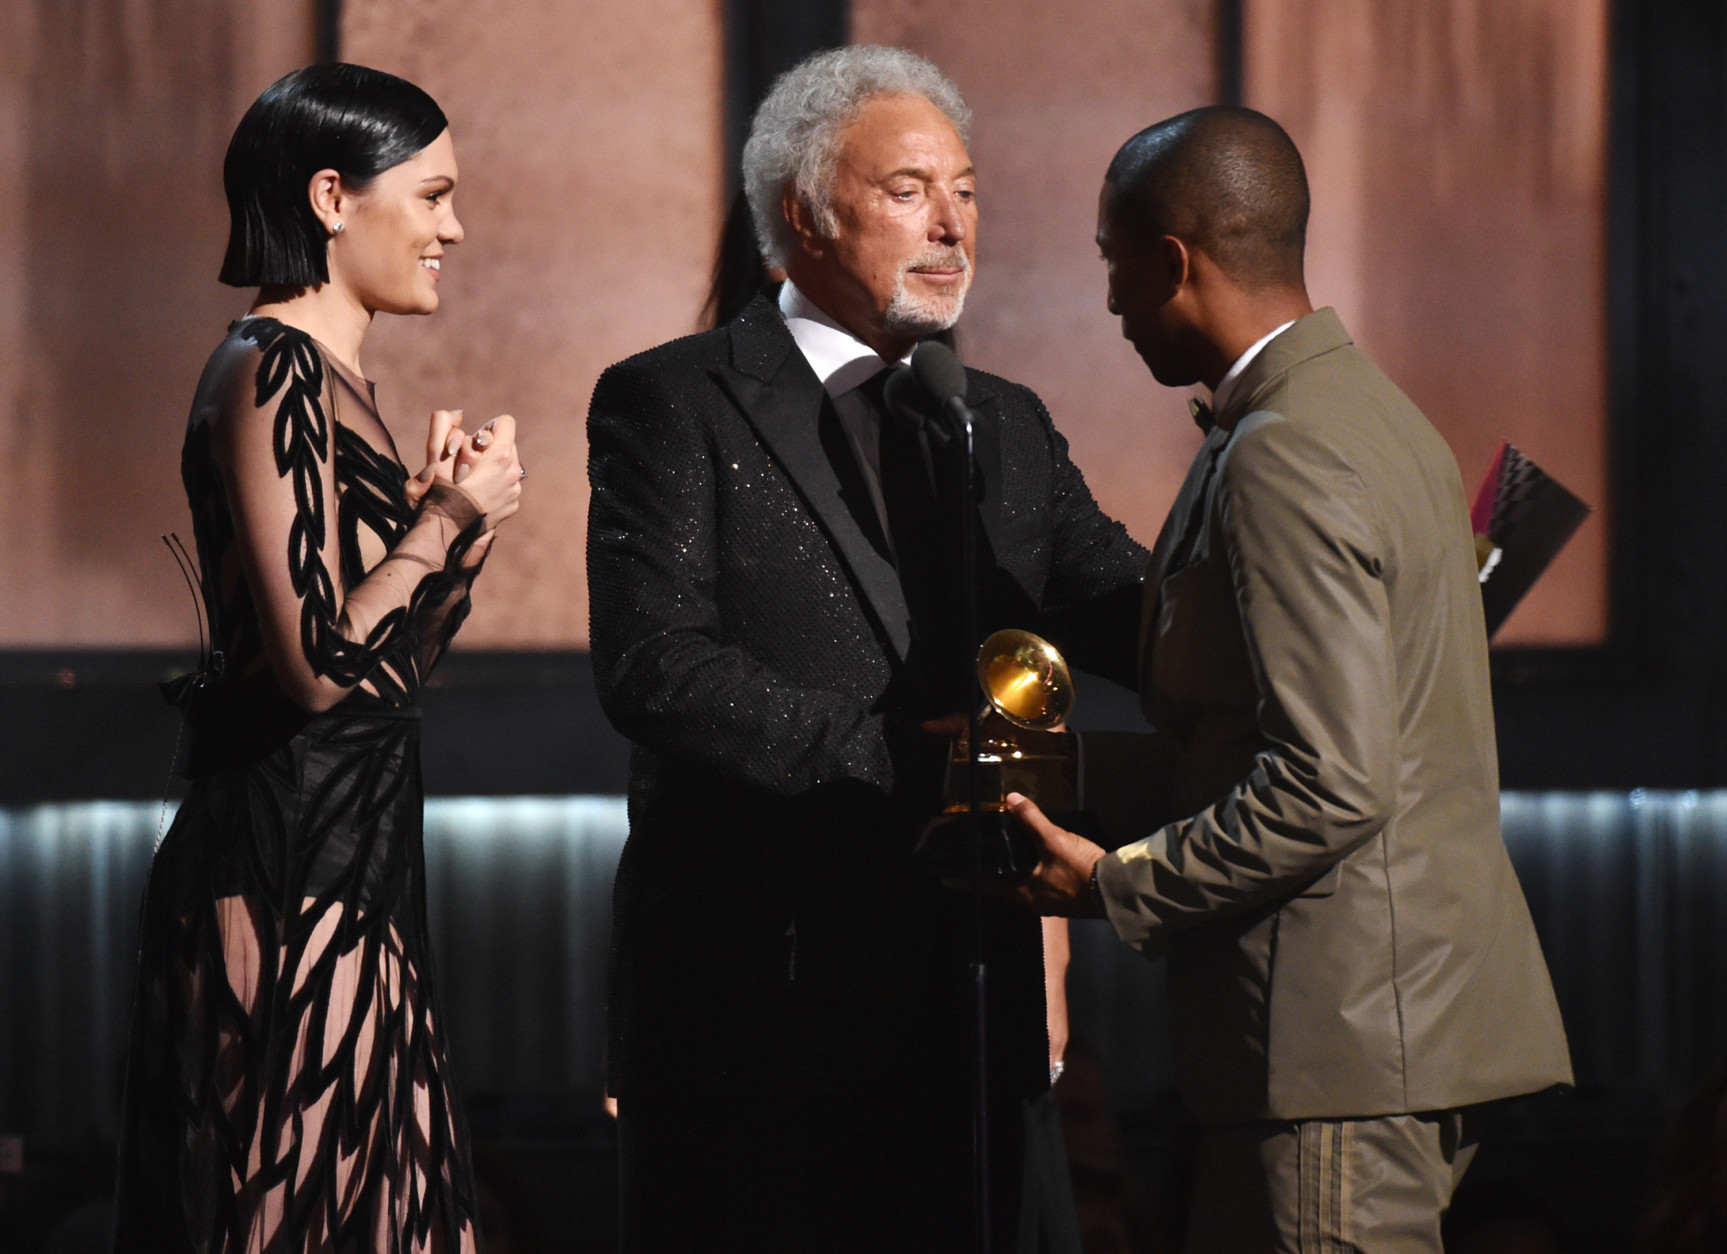 Jessie J, left, and Tom Jones present the award for best pop solo performance to Pharrell Williams, right, for "Happy" at the 57th annual Grammy Awards on Sunday, Feb. 8, 2015, in Los Angeles. (Photo by John Shearer/Invision/AP)